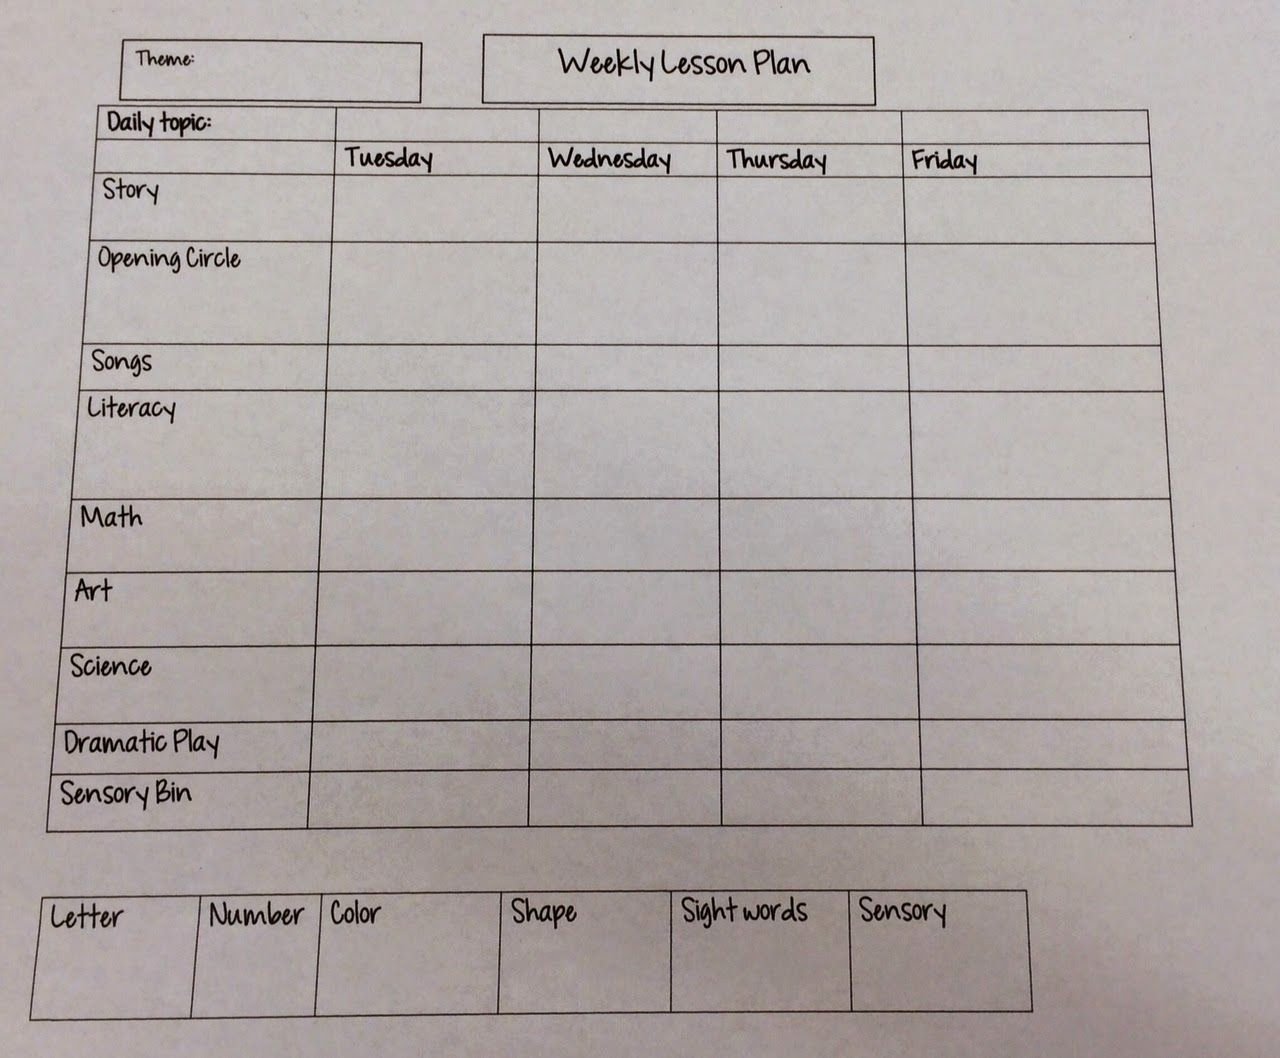 Weekly Lesson Plan Templates Beautiful Miss Nicole S Preschool Weekly Lesson Plan Template